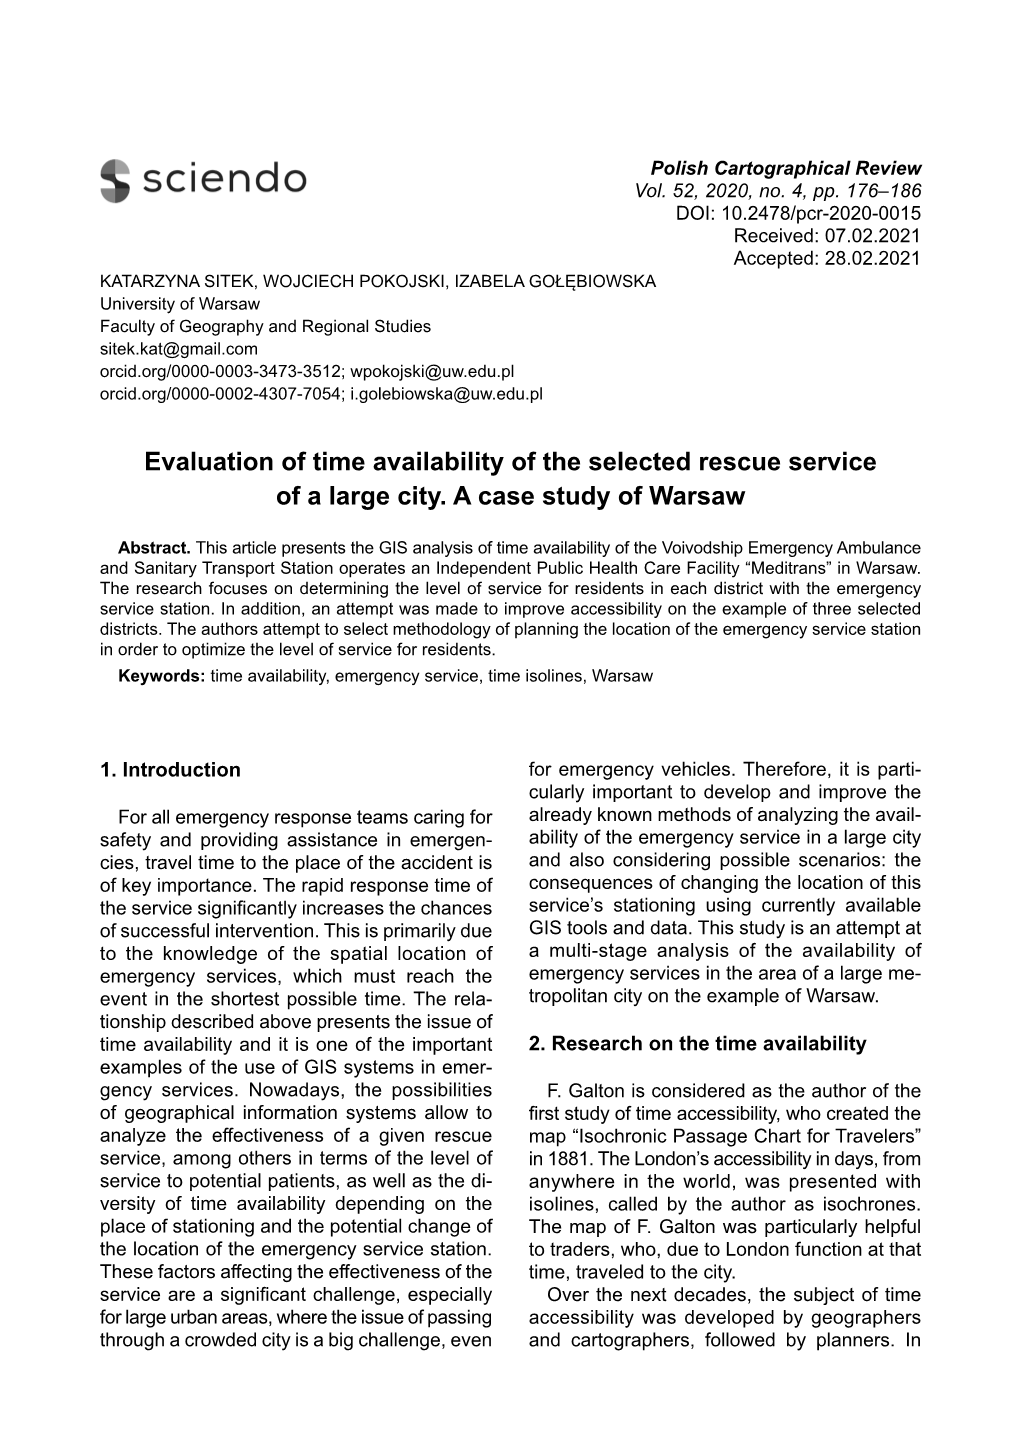 Evaluation of Time Availability of the Selected Rescue Service of a Large City